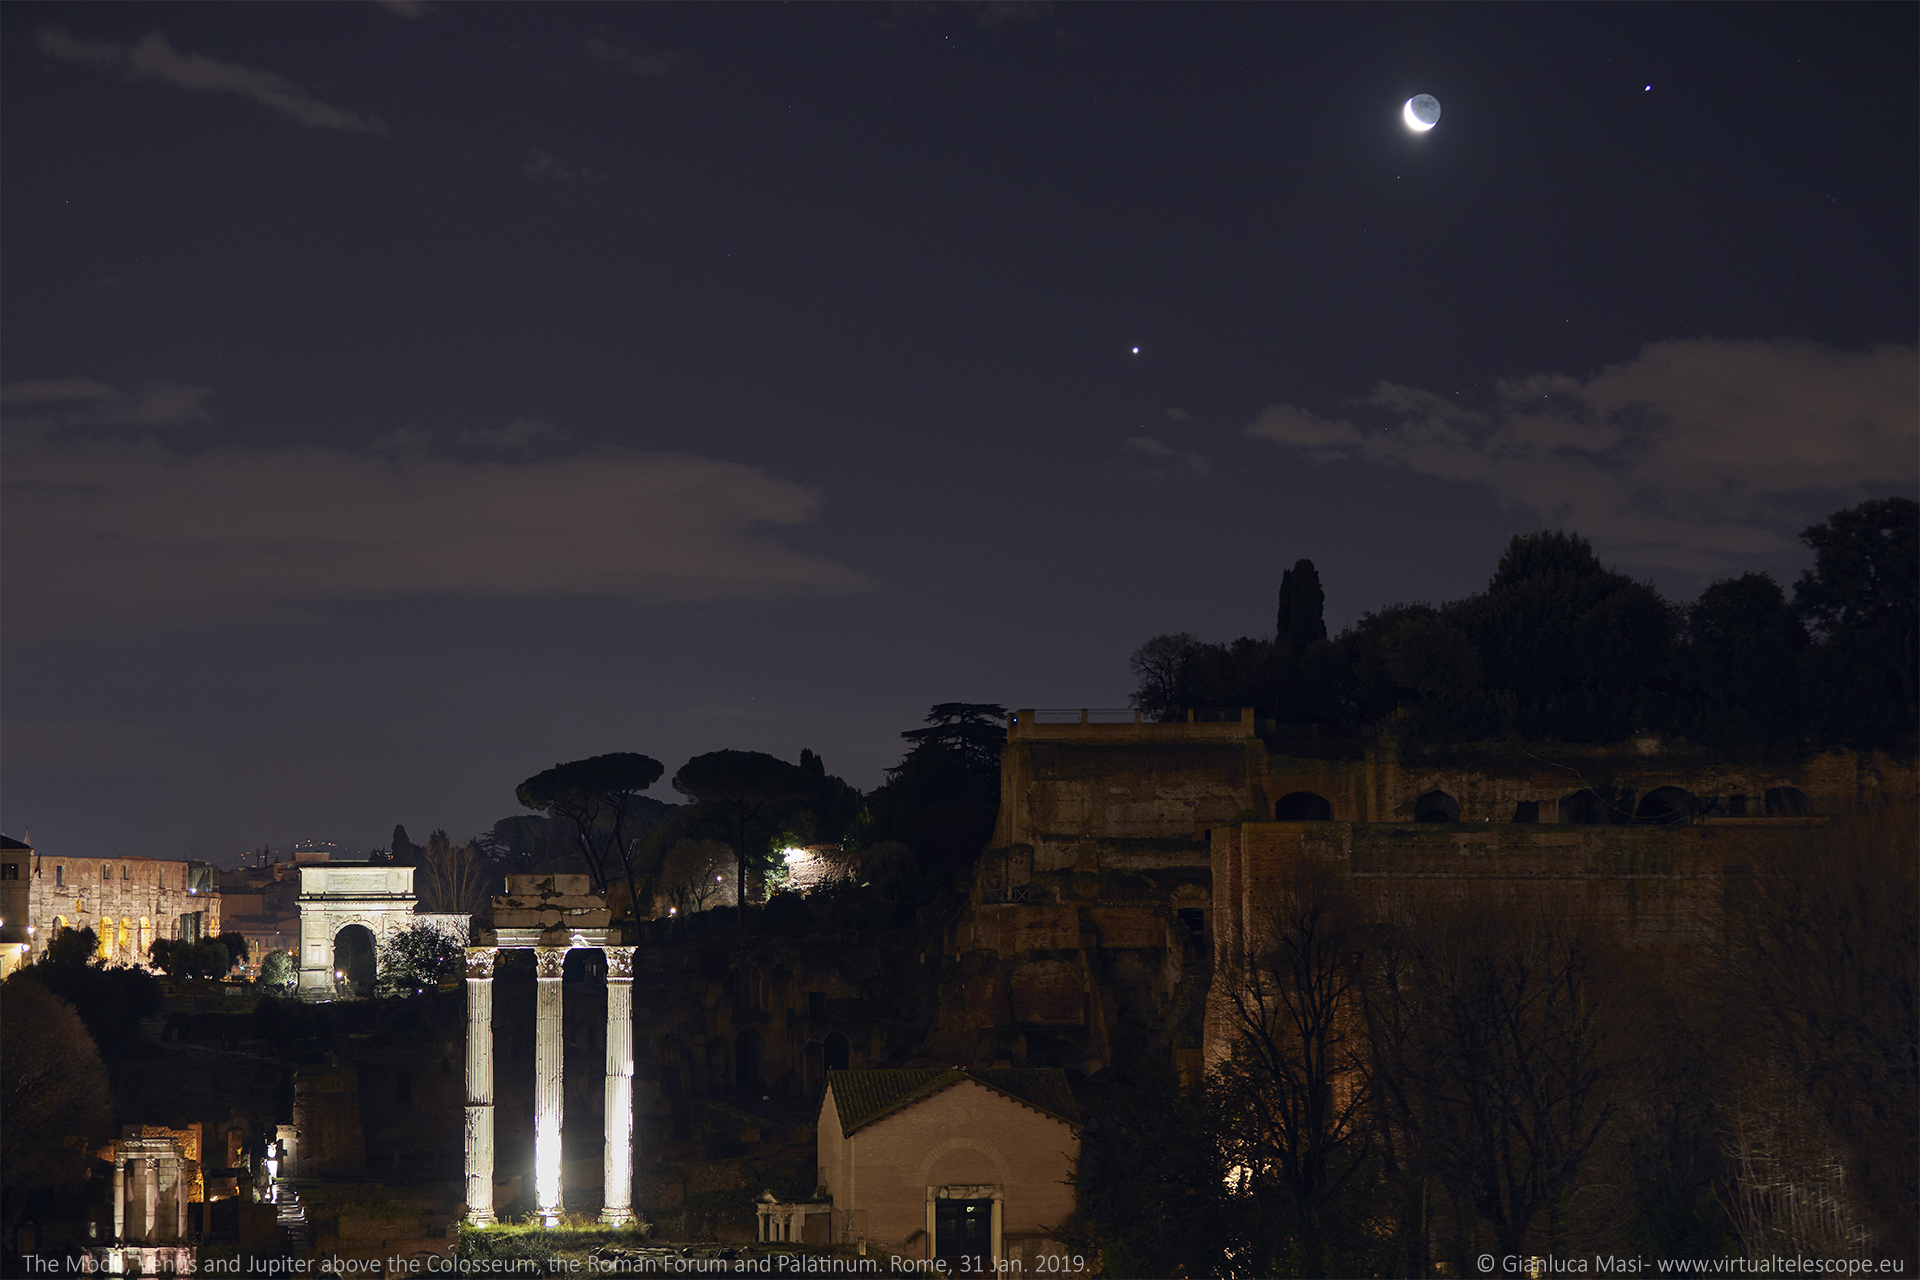 The Moon, Venus and Jupiter shine above the Colosseum, the Roman Forum and the Palatine Hill - 31 Jan. 2019